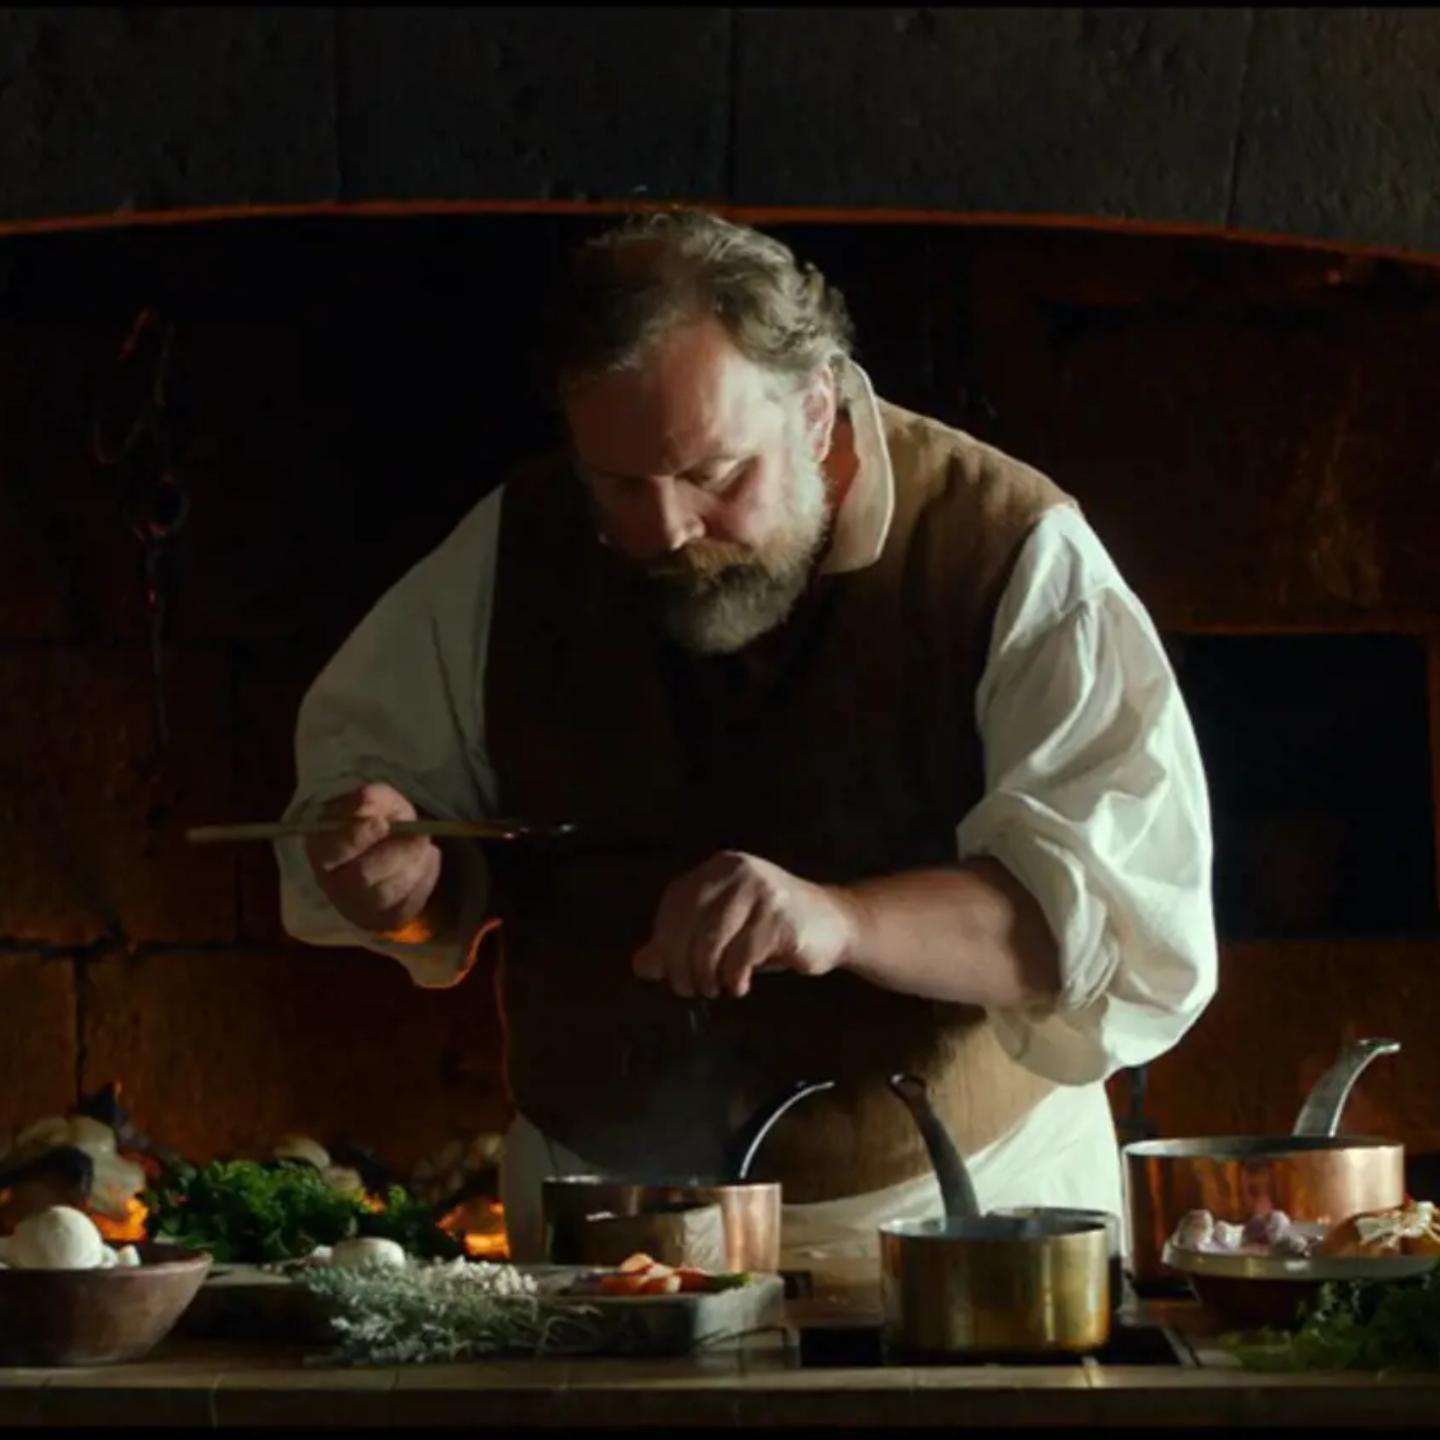 a man cooking in a kitchen